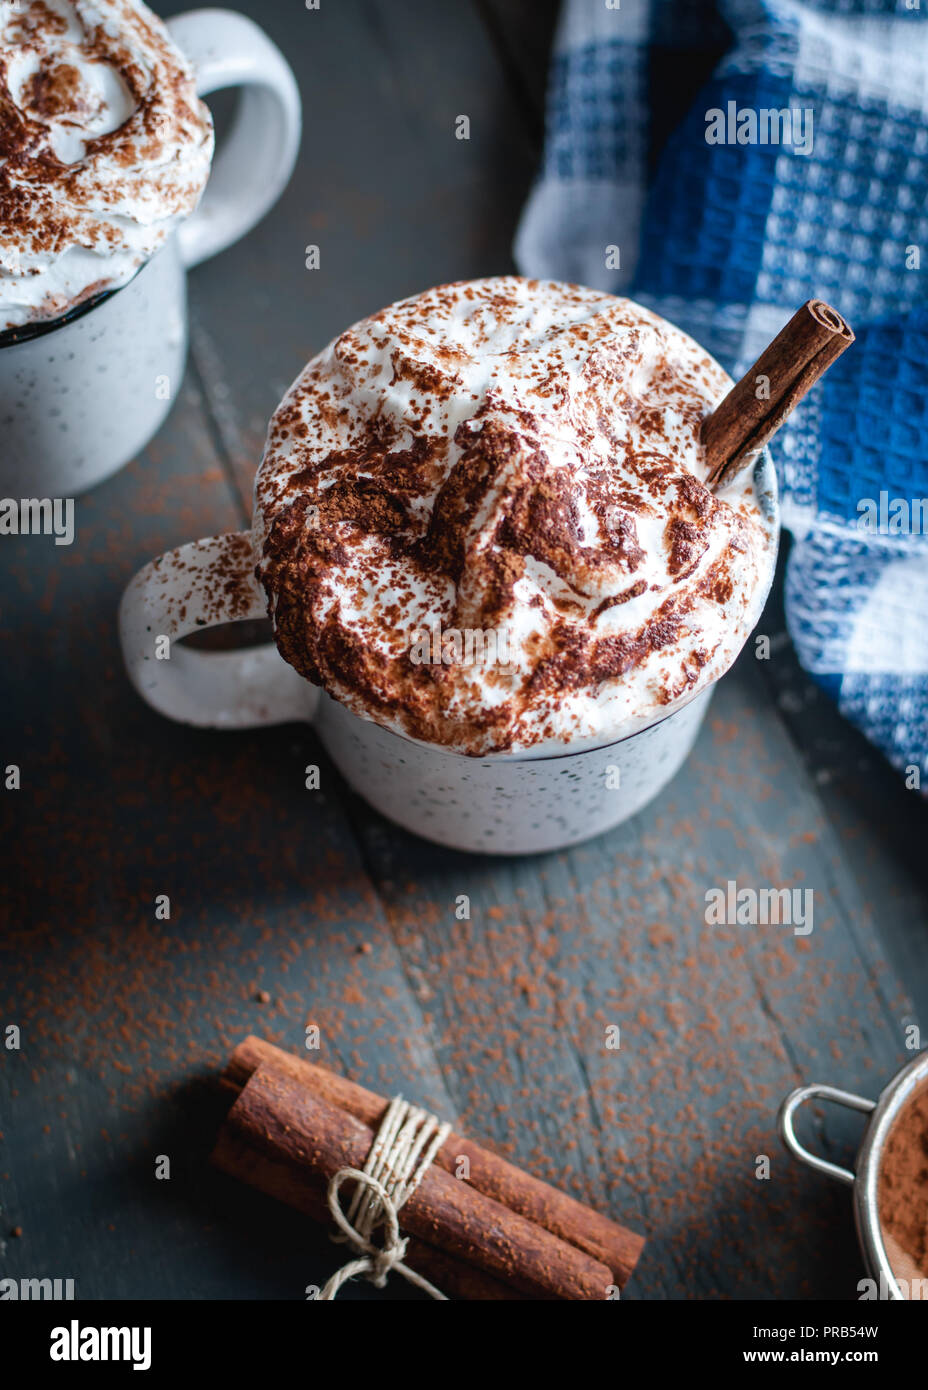 Hot cocoa with whipped cream and cinnamon stick on dark background, top view Stock Photo